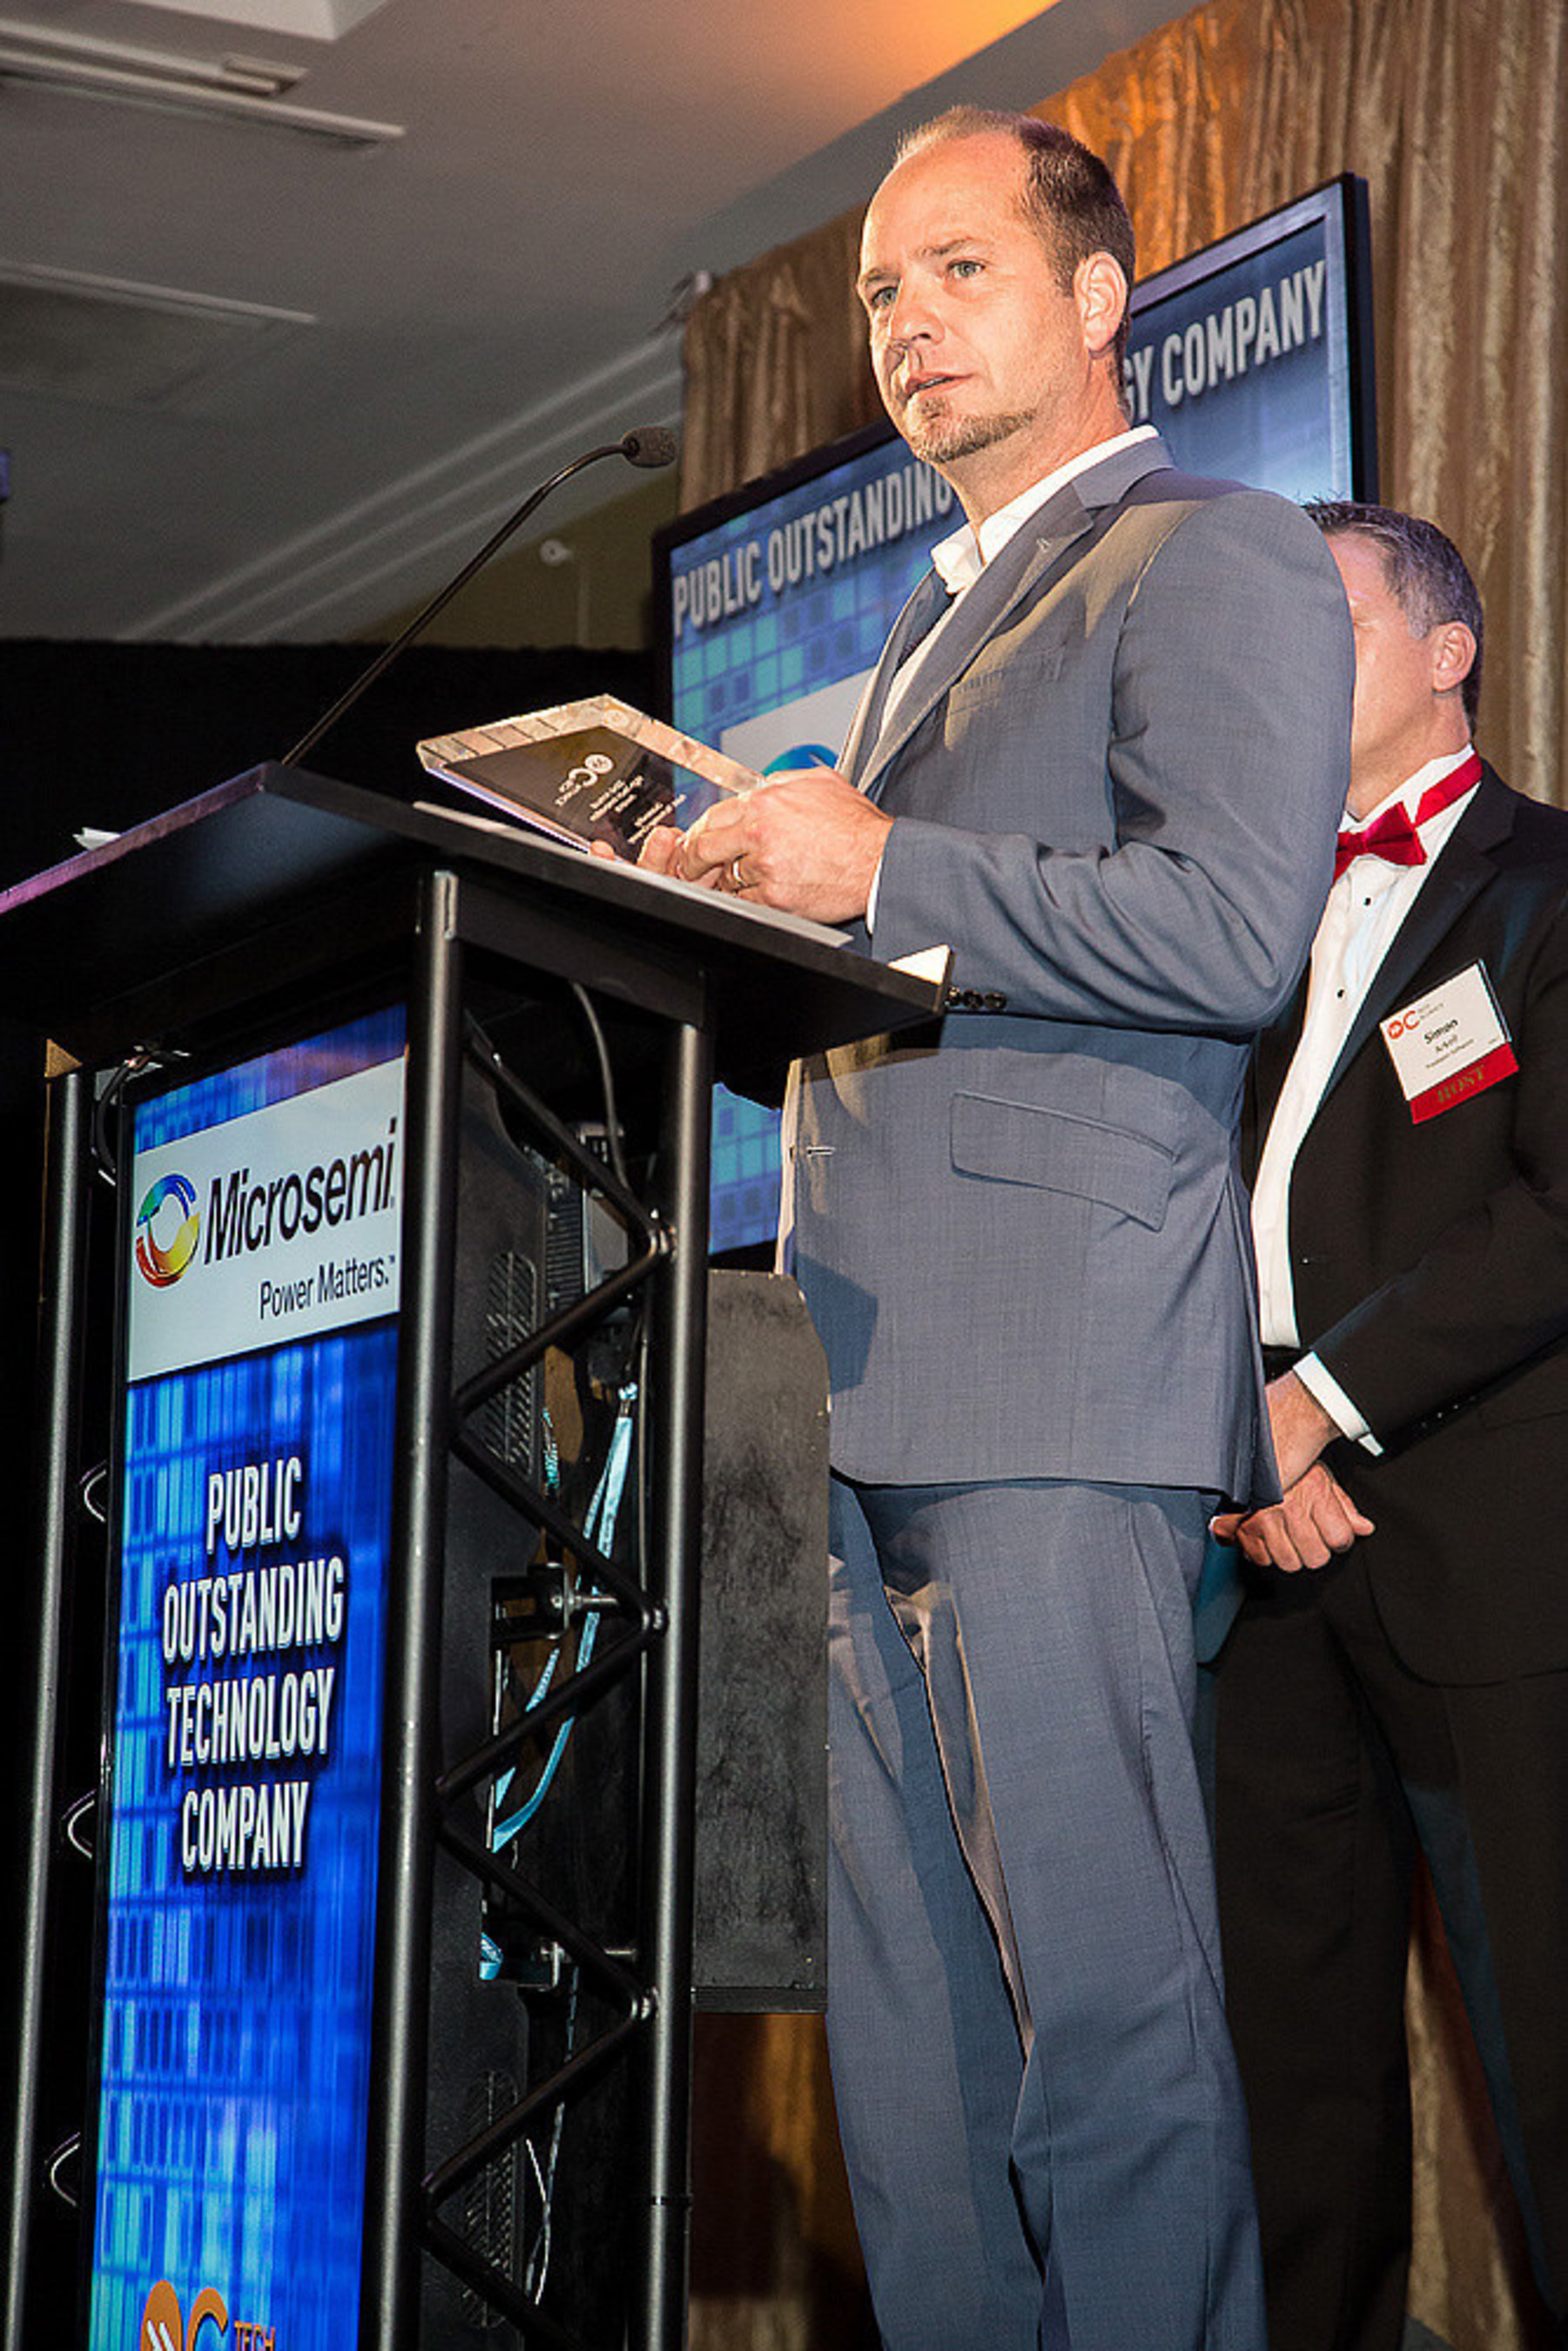 Microsemi's President and COO Paul Pickle accepts the company's 2015 "Outstanding Public Technology Company" award from the Orange County Tech Alliance. Microsemi was also the recipient of its "Enterprise Hardware & Device" award. OC Tech Alliance's 22nd Annual High-Tech Innovation Awards celebrate excellence and achievement in the region's technology industry, honoring local companies, individuals and products that drive innovation in Orange County, California.